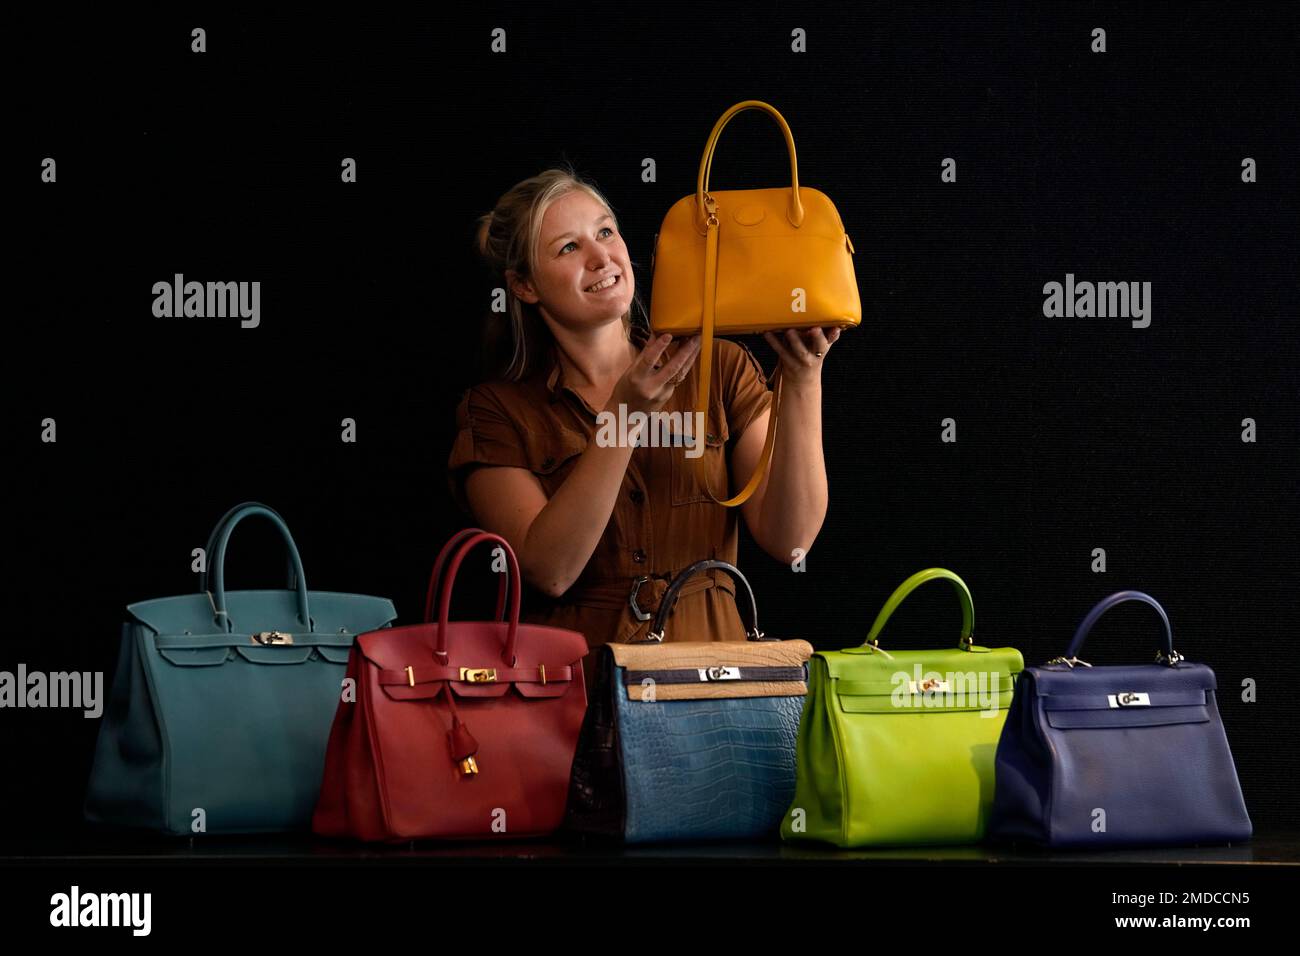 a bonhams employee displays designer handbags at the auction house in london wednesday oct 6 2021 bags and fashion items with estimates ranging from 400 40000 uk pounds 540 54250 us dollars will be up for auction at bonhams in london on oct12 in the designer handbags and fashion sale ap photokirsty wigglesworth 2MDCCN5